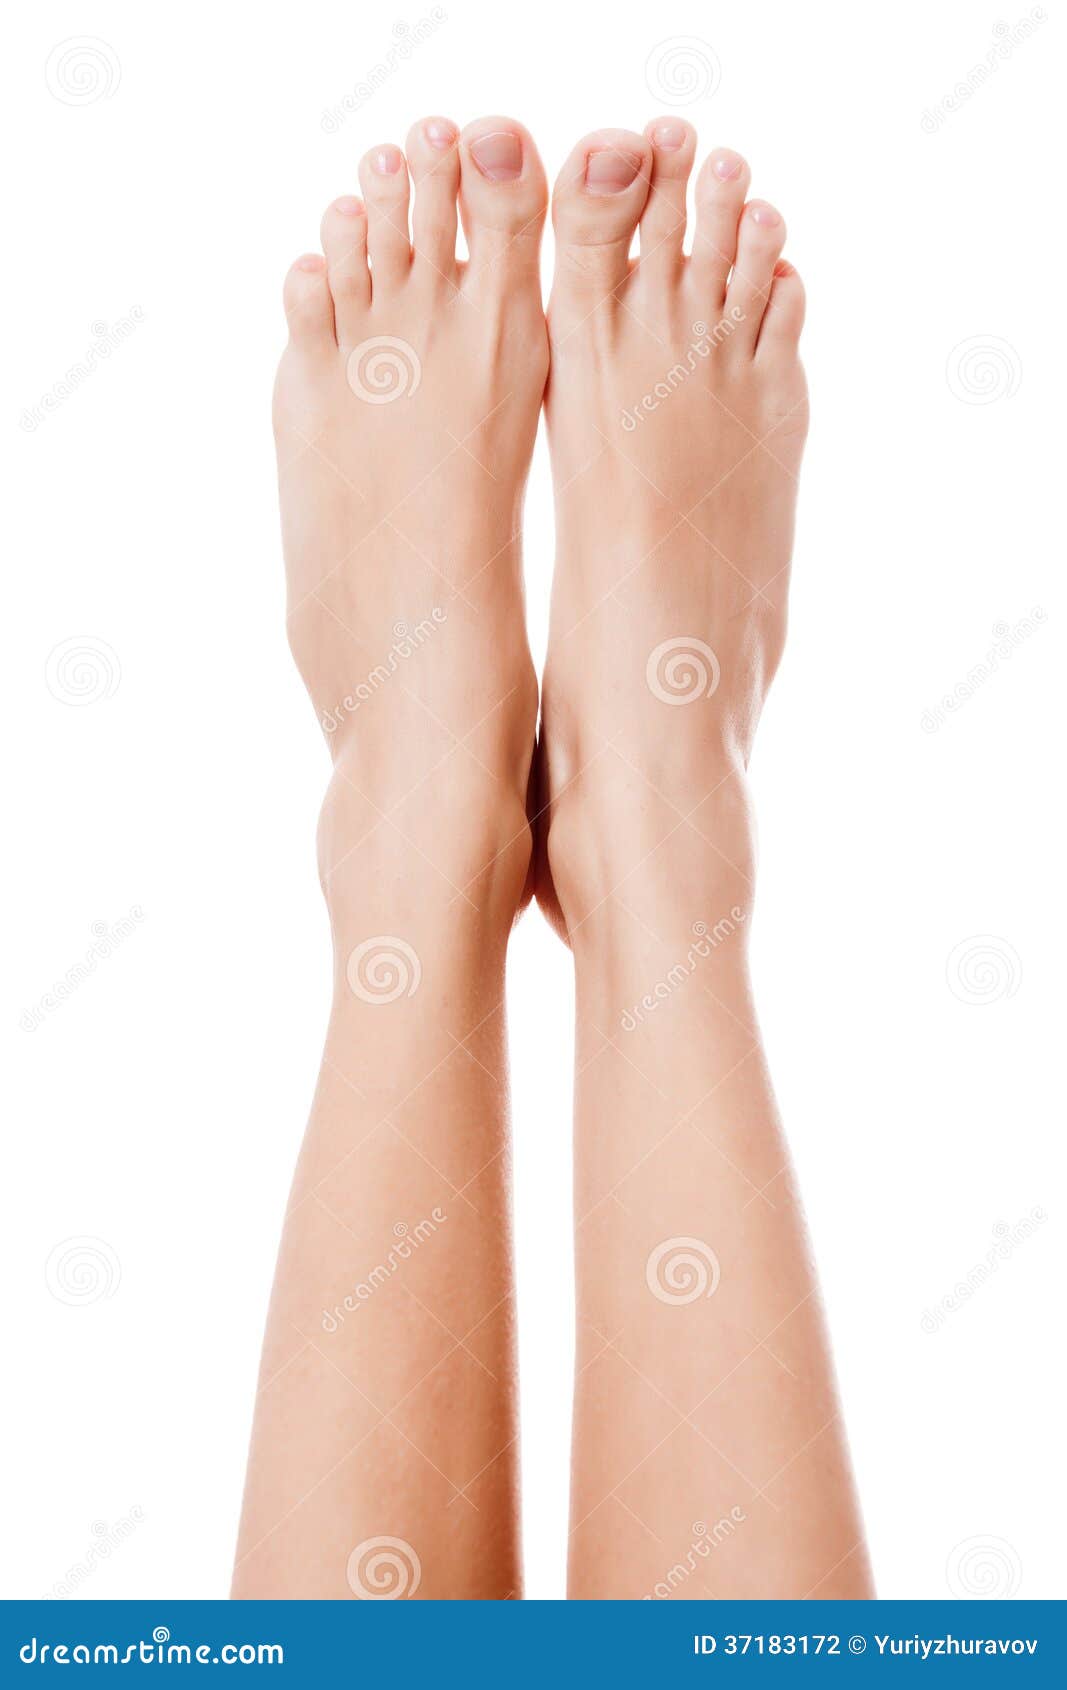 Close Up Image of Woman Bare Feet. Isolated on White Stock Photo